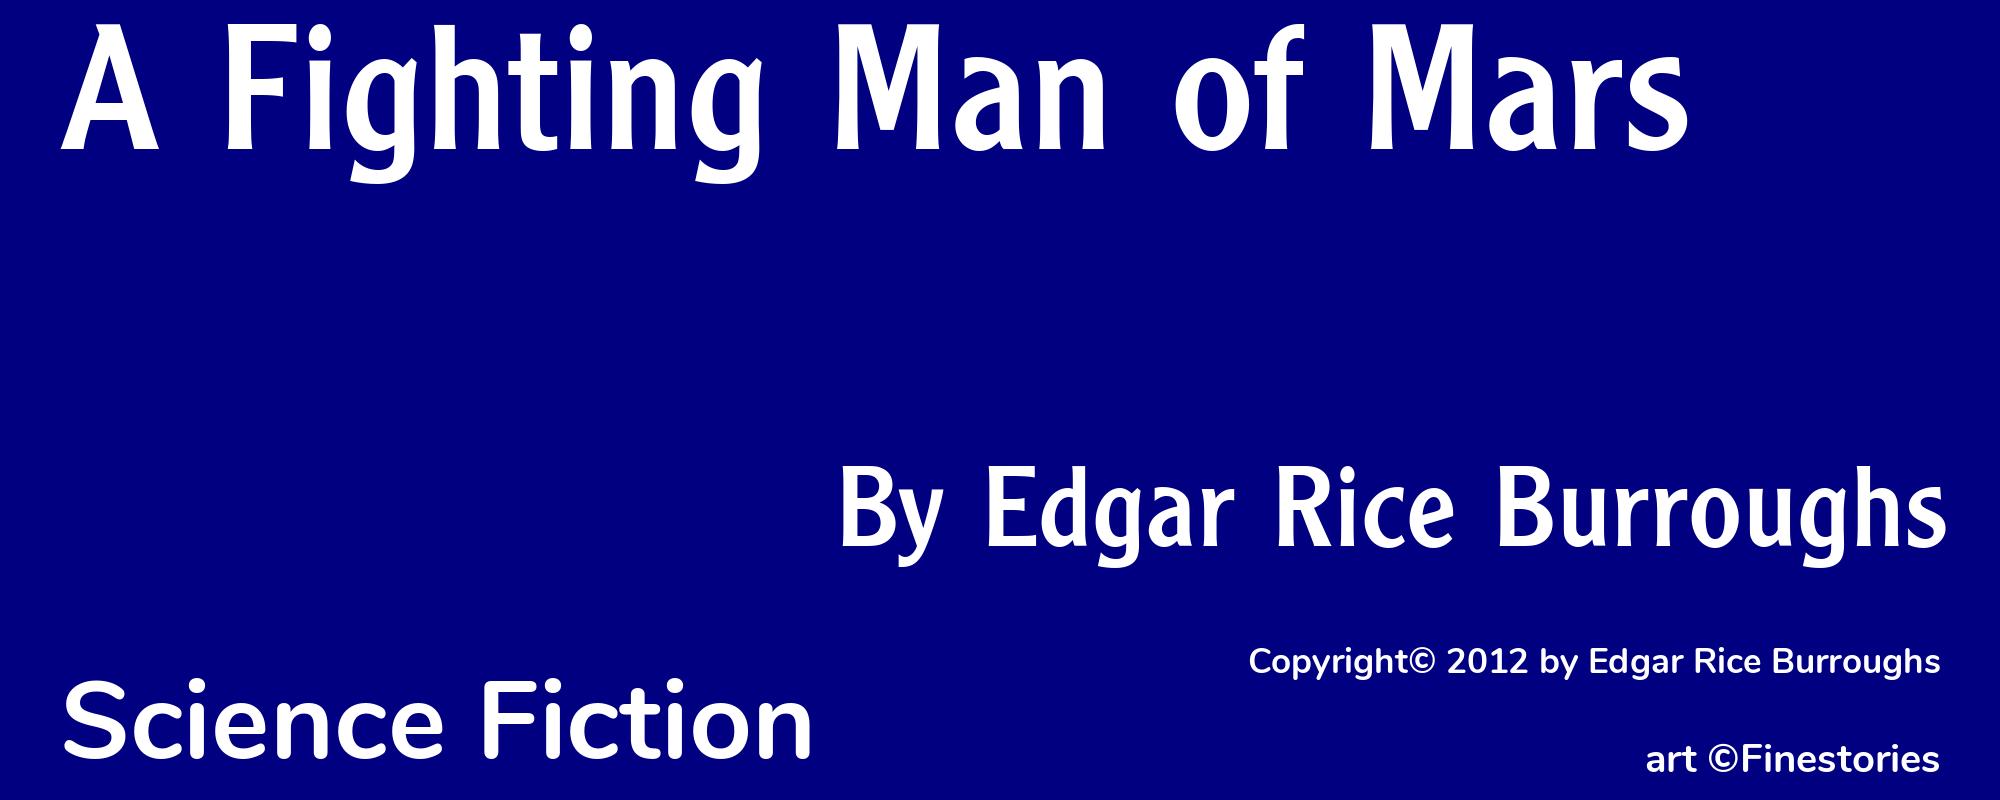 A Fighting Man of Mars - Cover